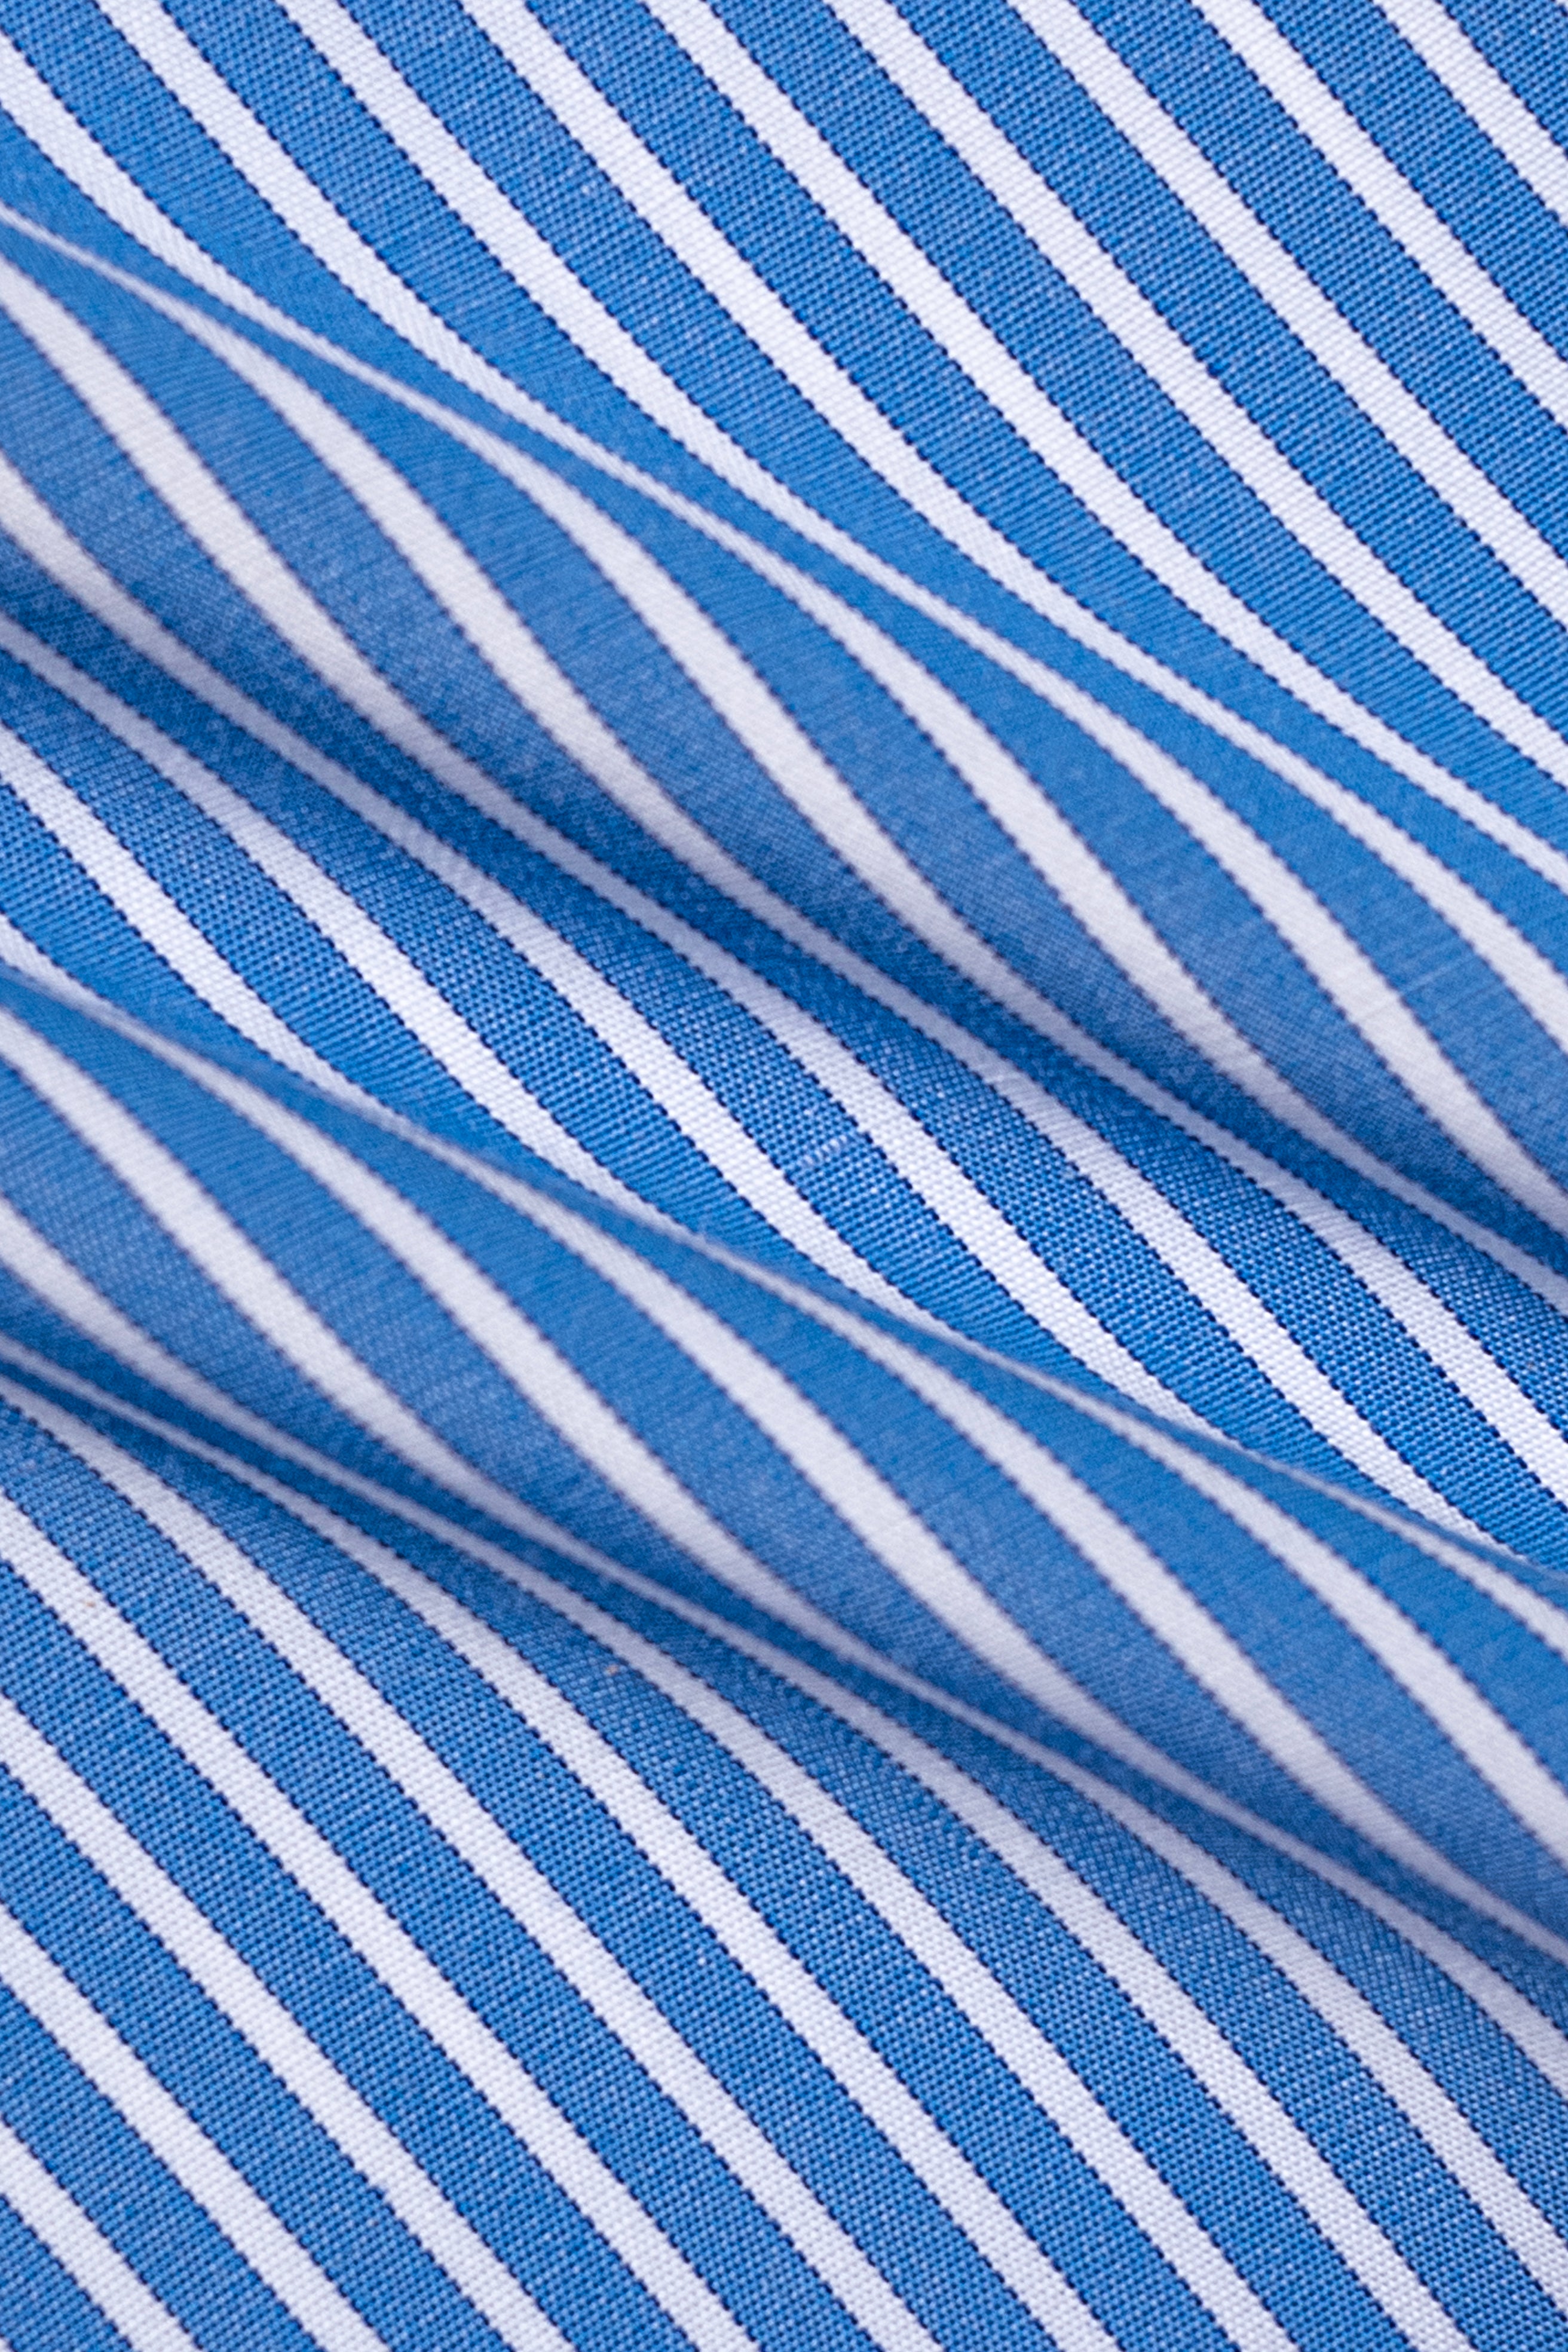 LIMITED EDITION SHIRTS BLUE WHITE STRIPES